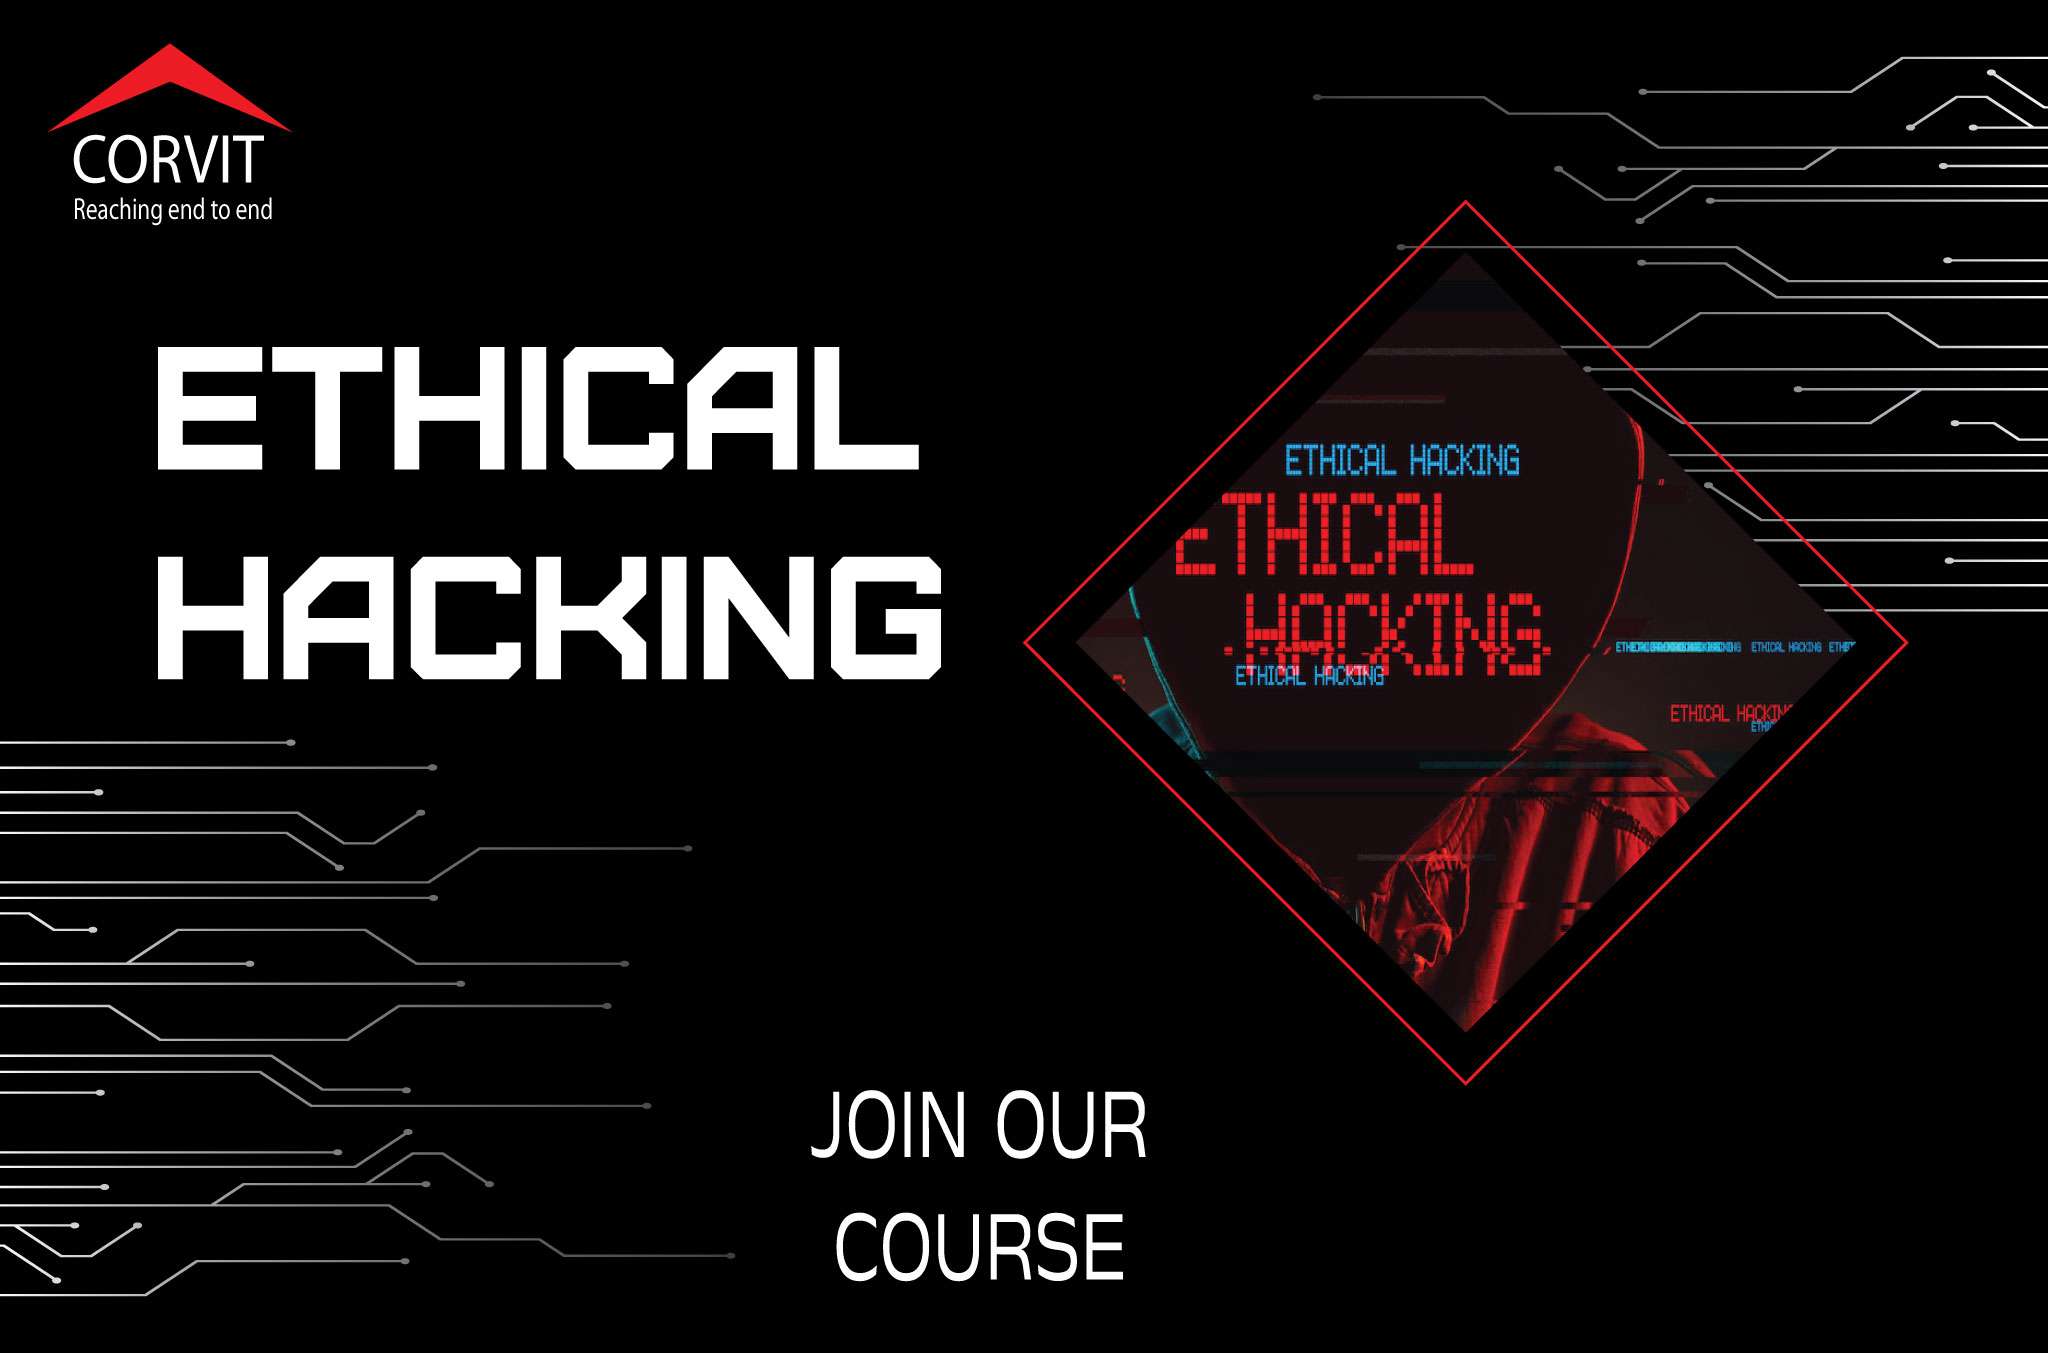 ETHICAL HACKING